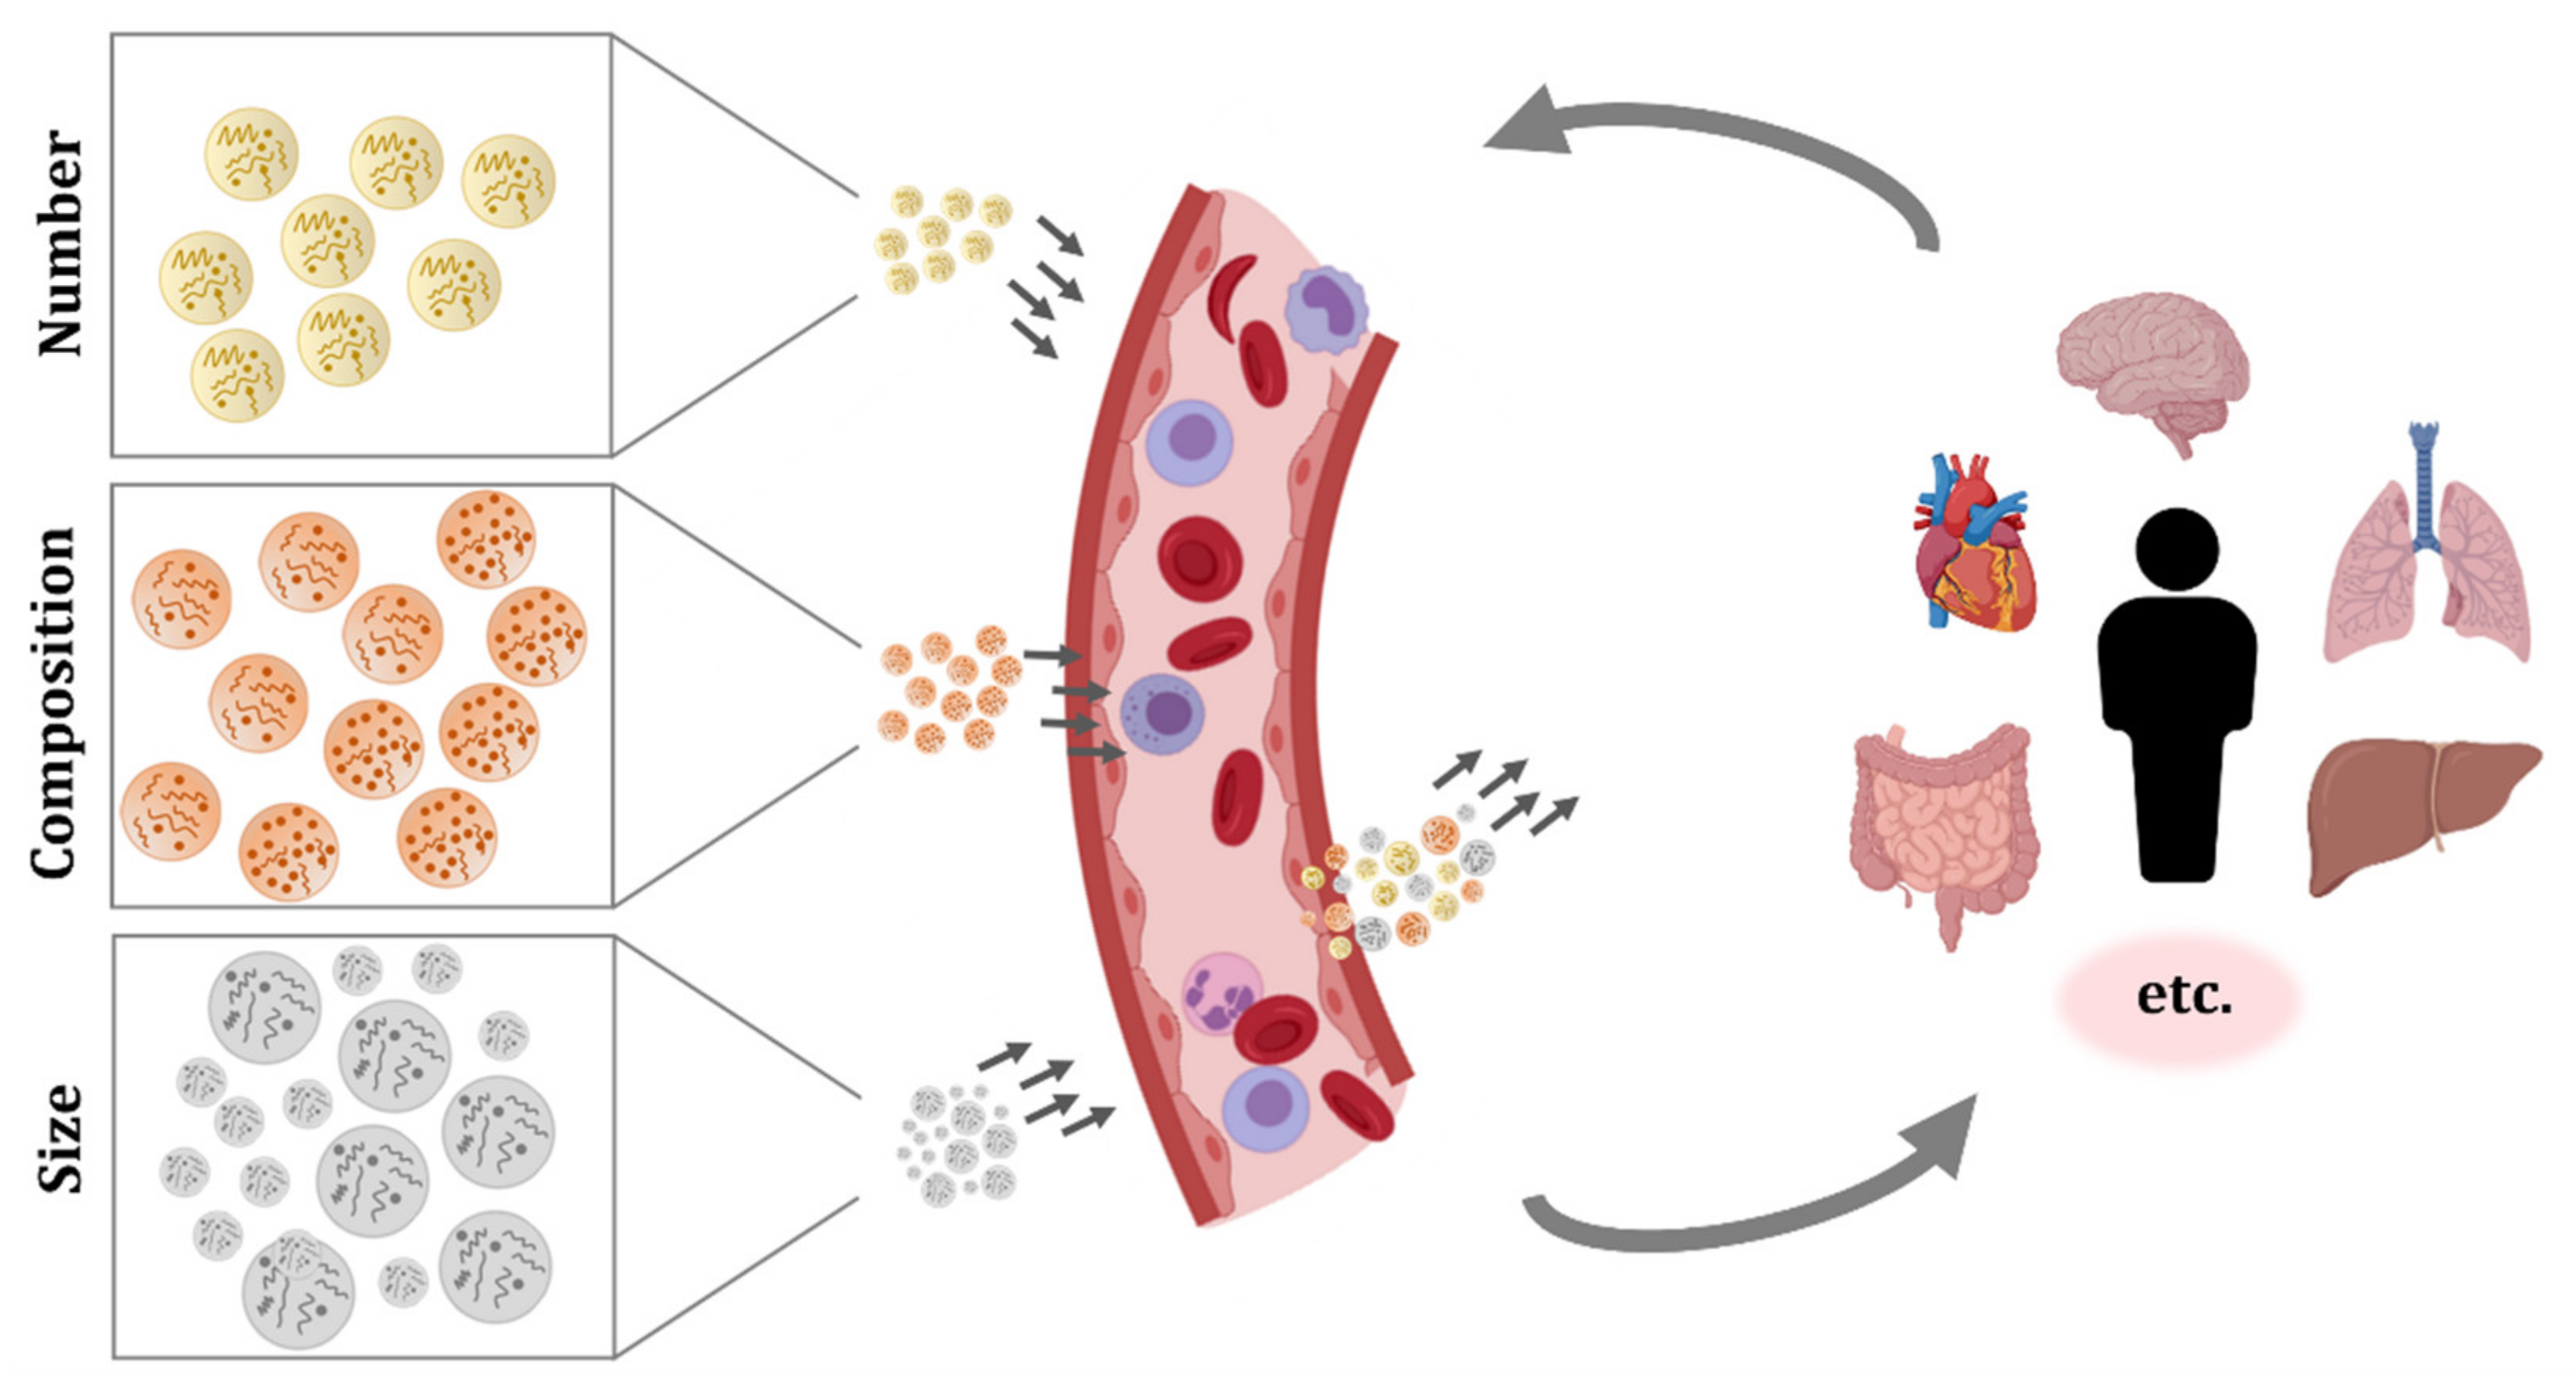 In Vivo Real-Time Imaging of Extracellular Vesicles in Liver